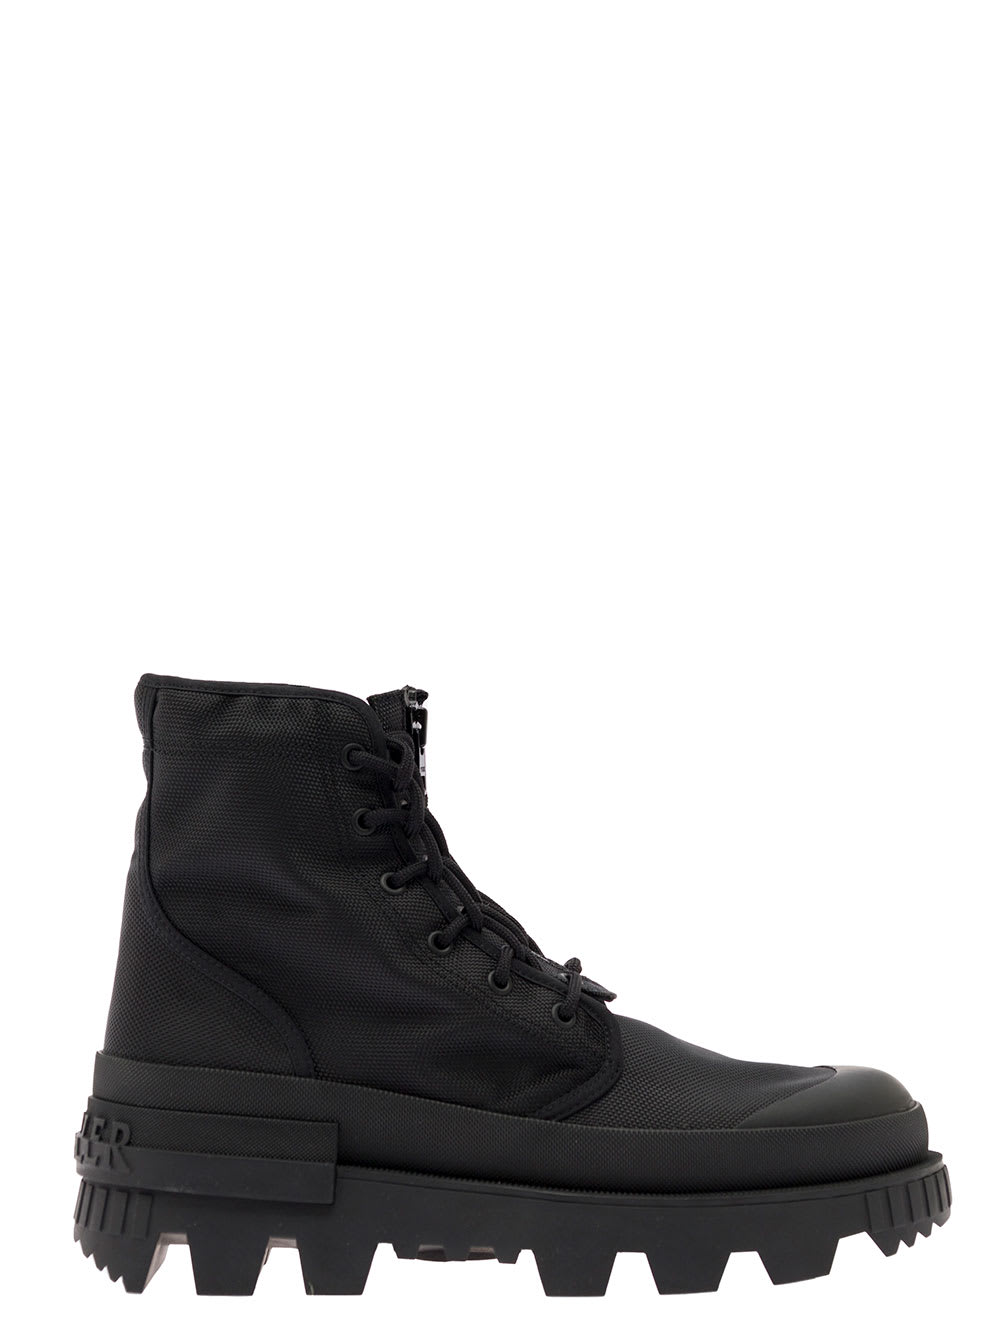 MONCLER GENIUS HYKE DESERTYX BLACK LACE-UP BOOTS WITH CHUNKY PLATFORM IN NYLON MAN